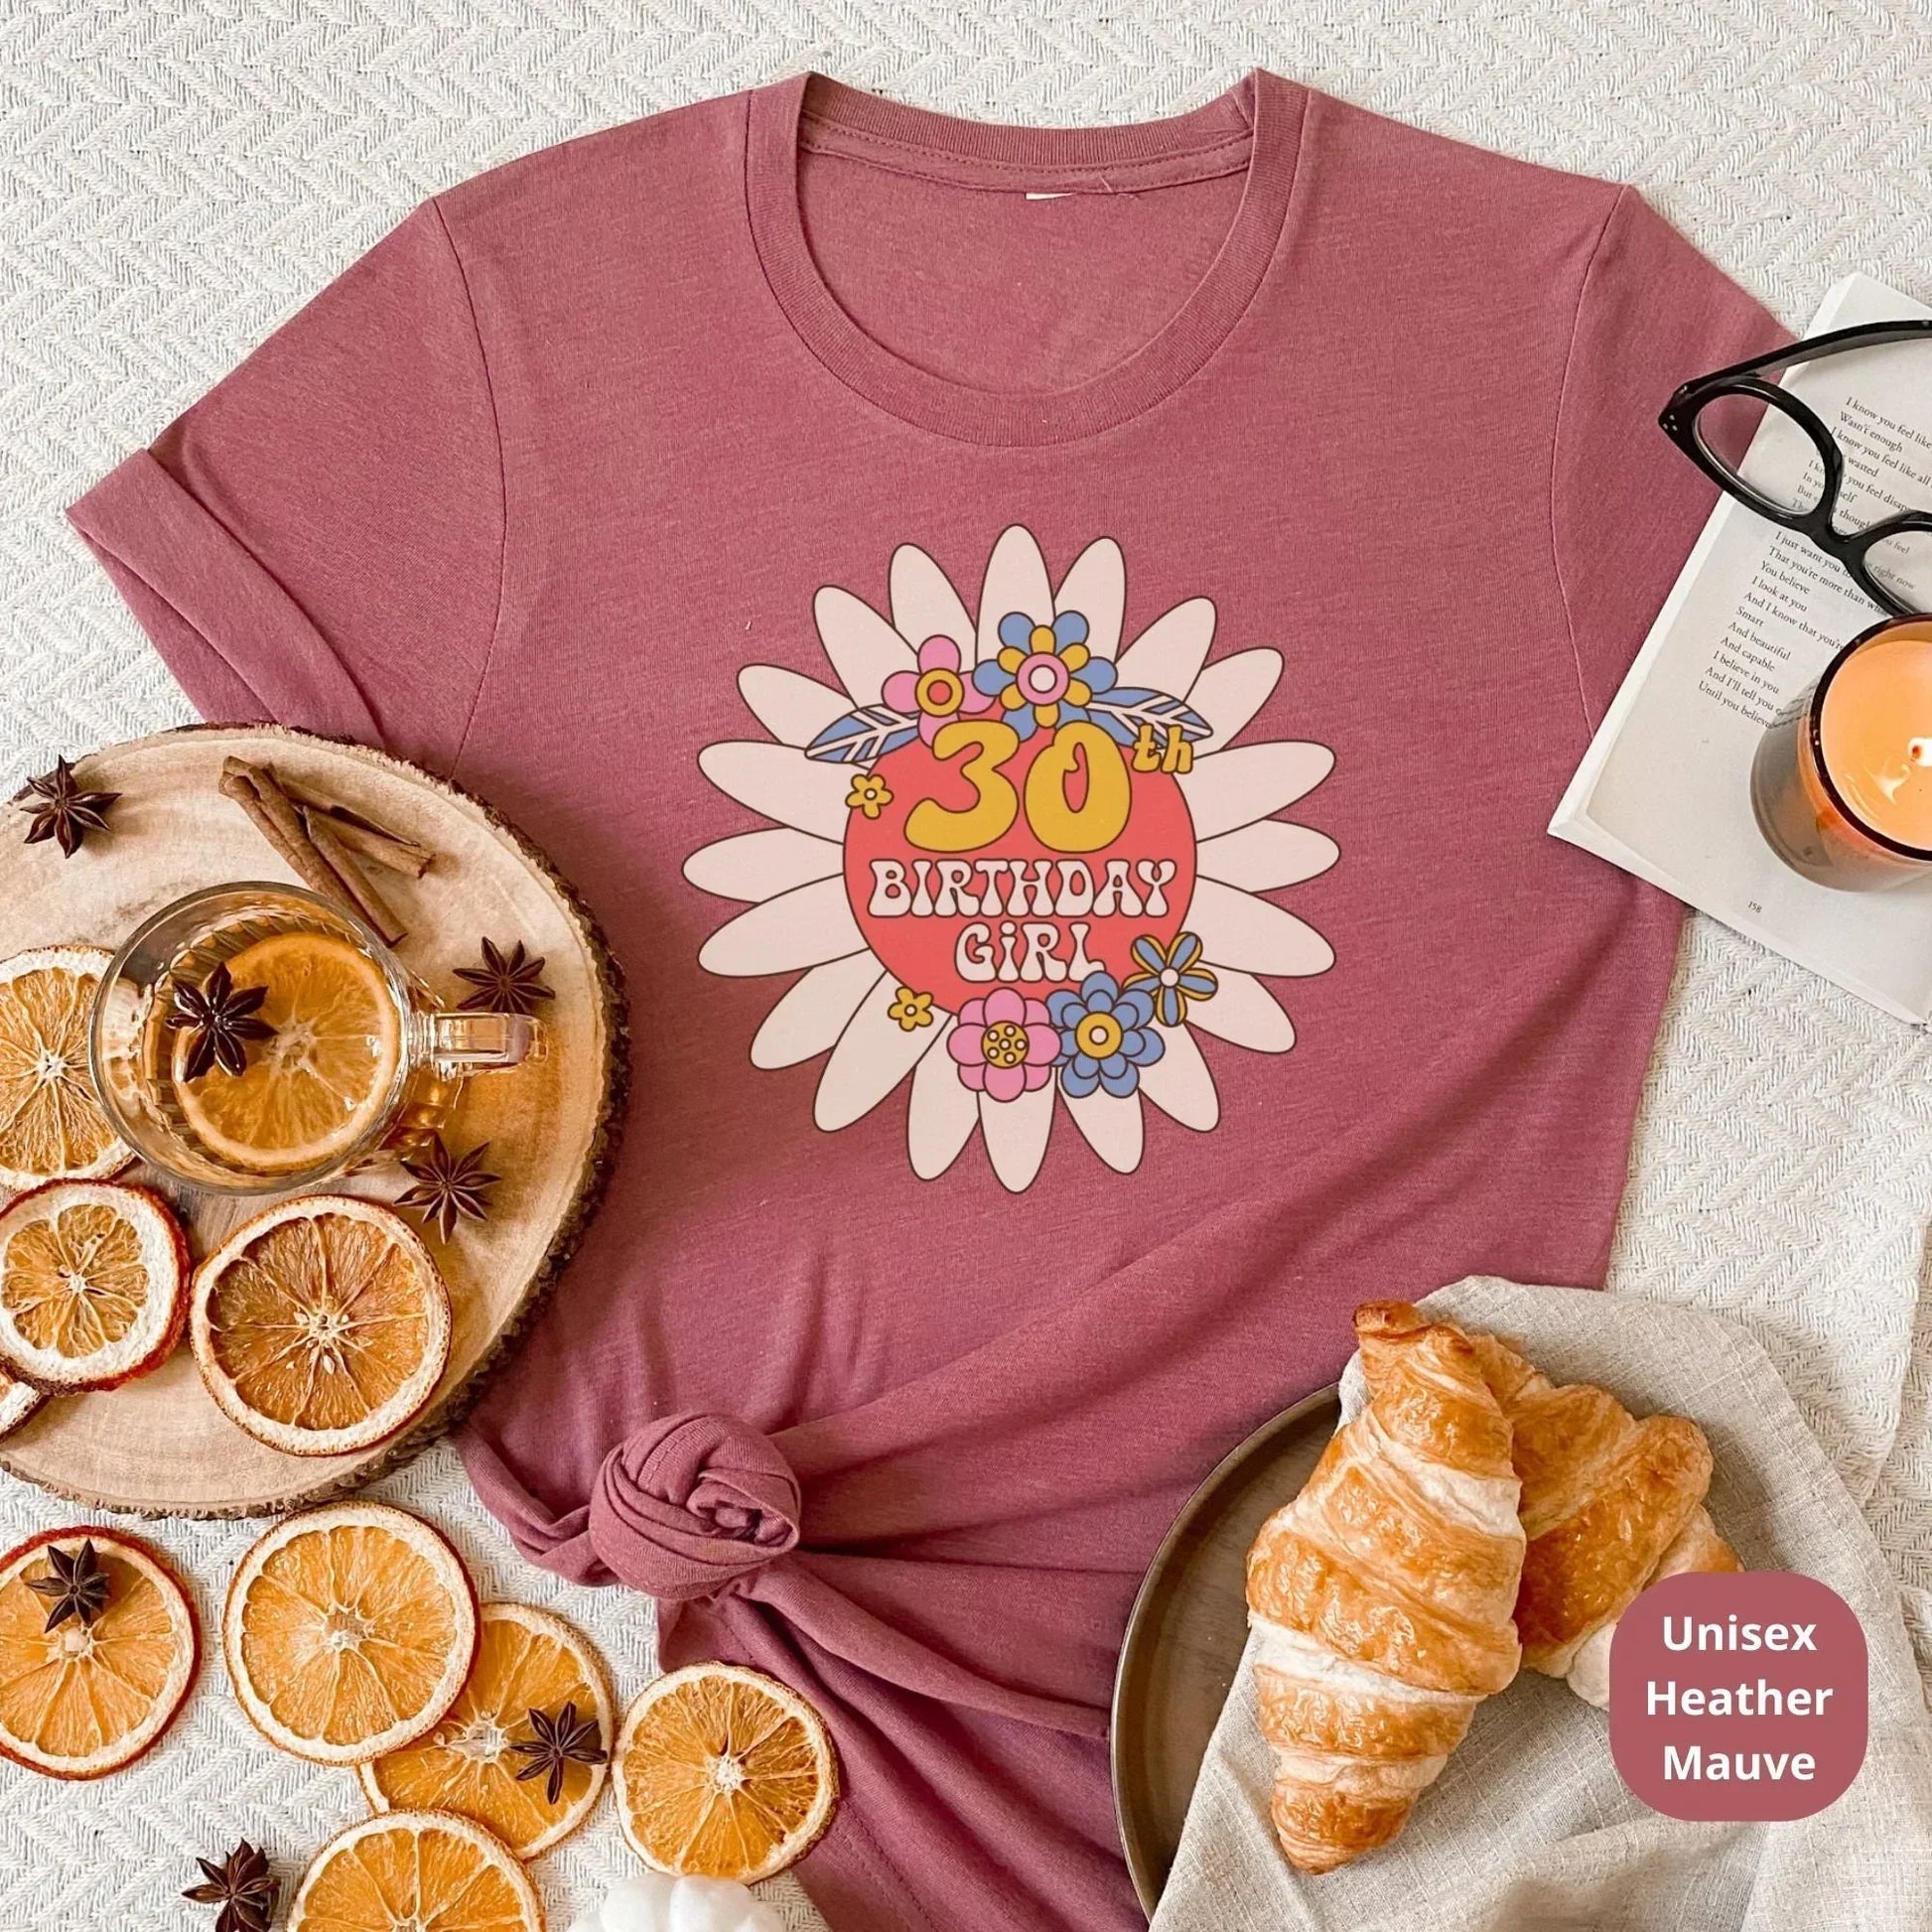 30th Birthday Shirt, 30th Birthday Gift, Matching Group Party Tees